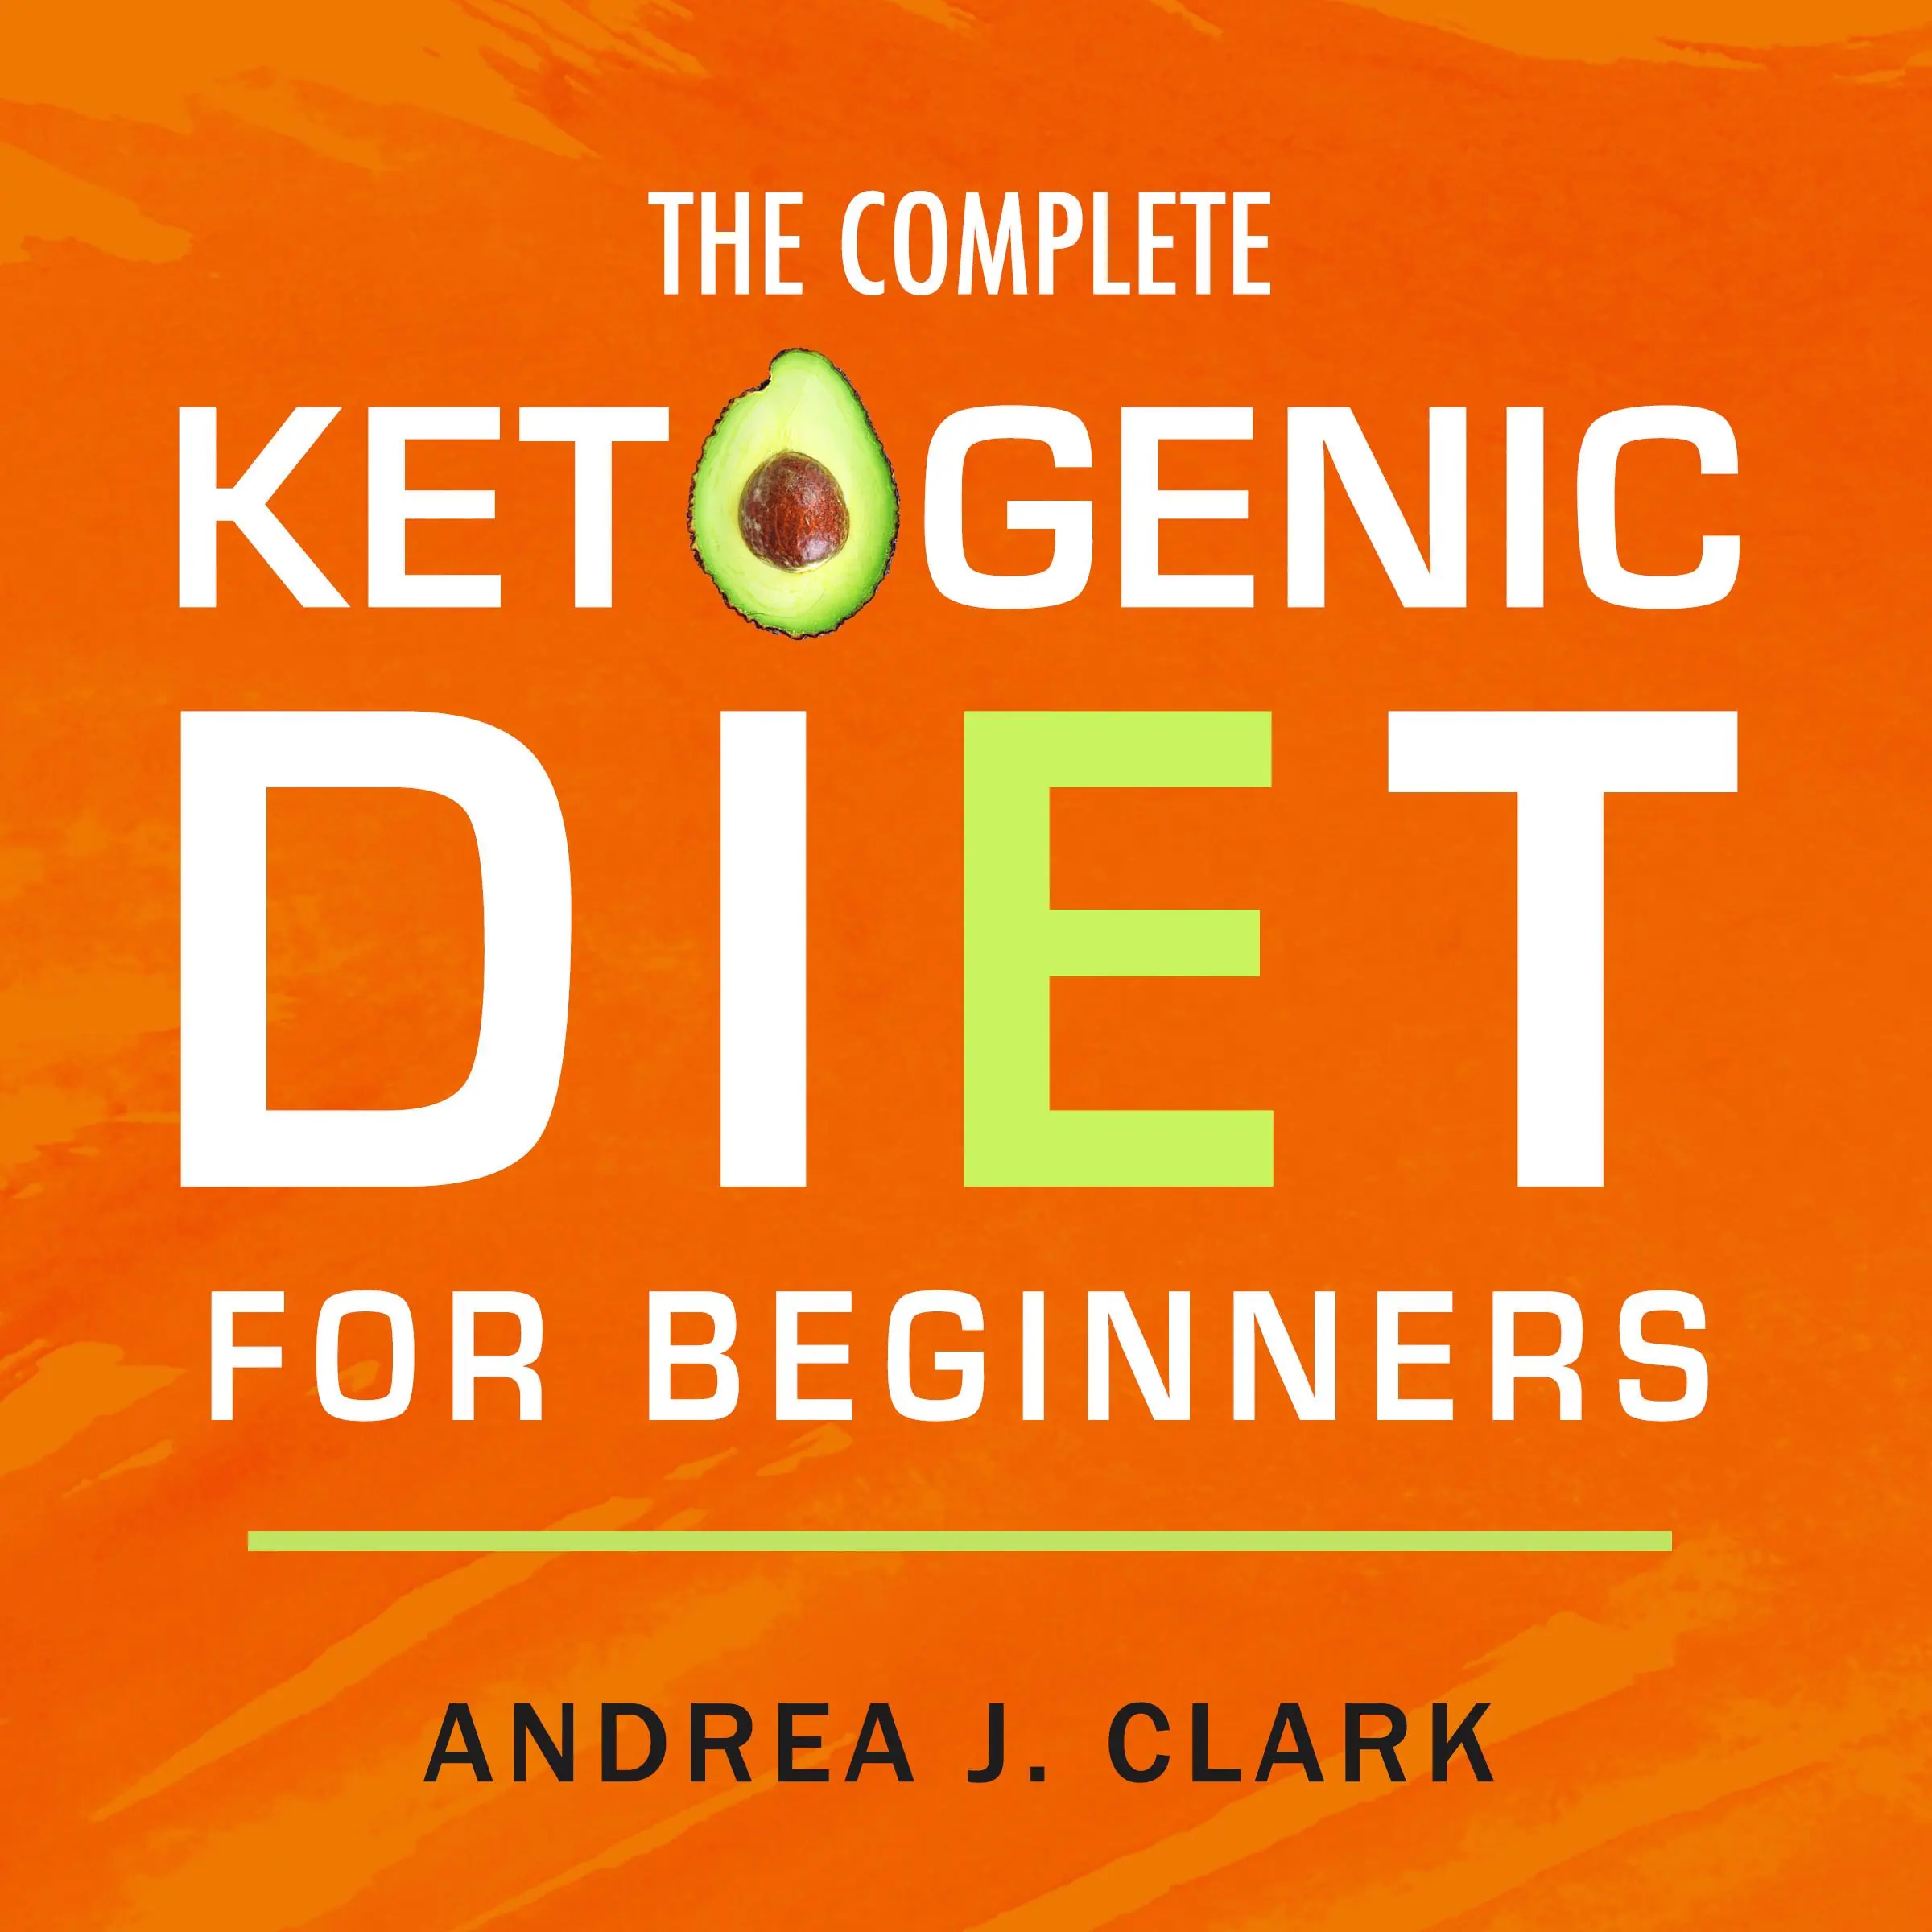 The Complete Ketogenic Diet for Beginners: The Ultimate Guide to Living the Keto Lifestyle Audiobook by Andrea J. Clark